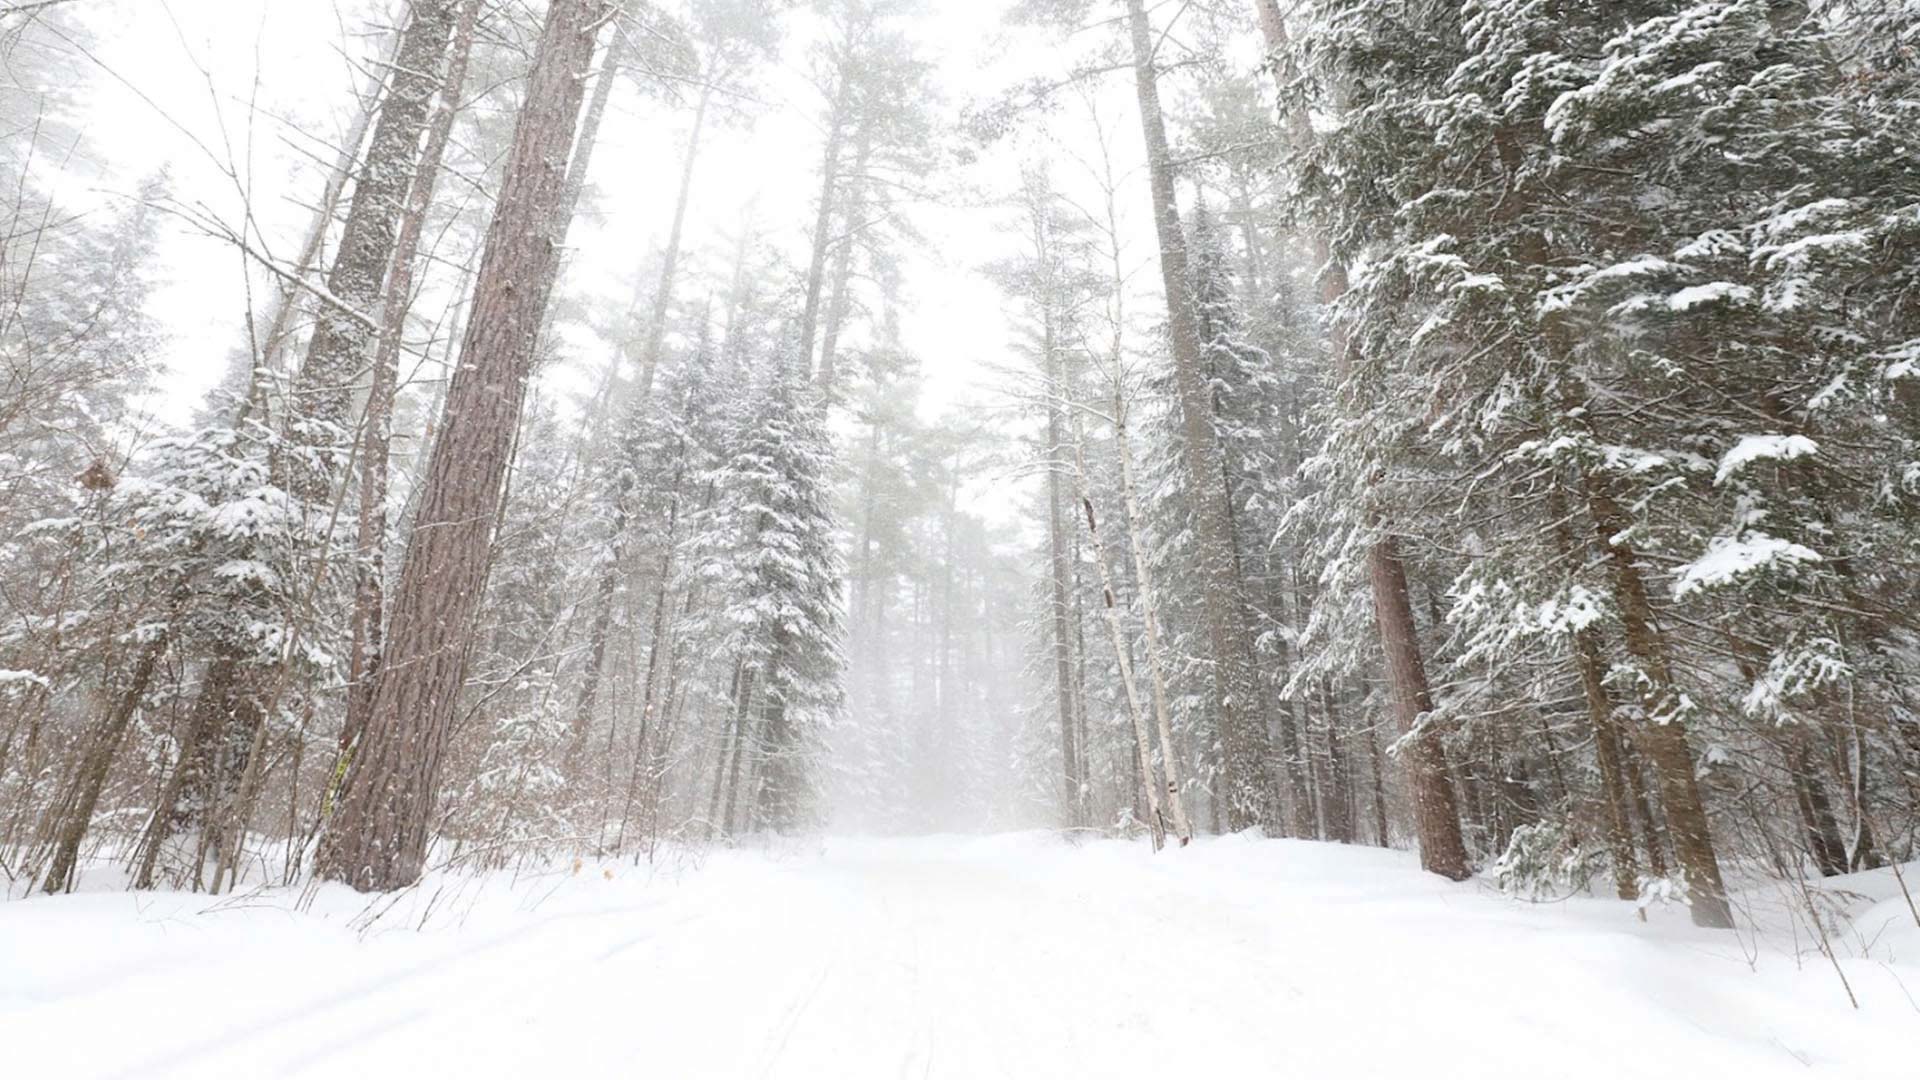 Trail winding between snow covered pine trees